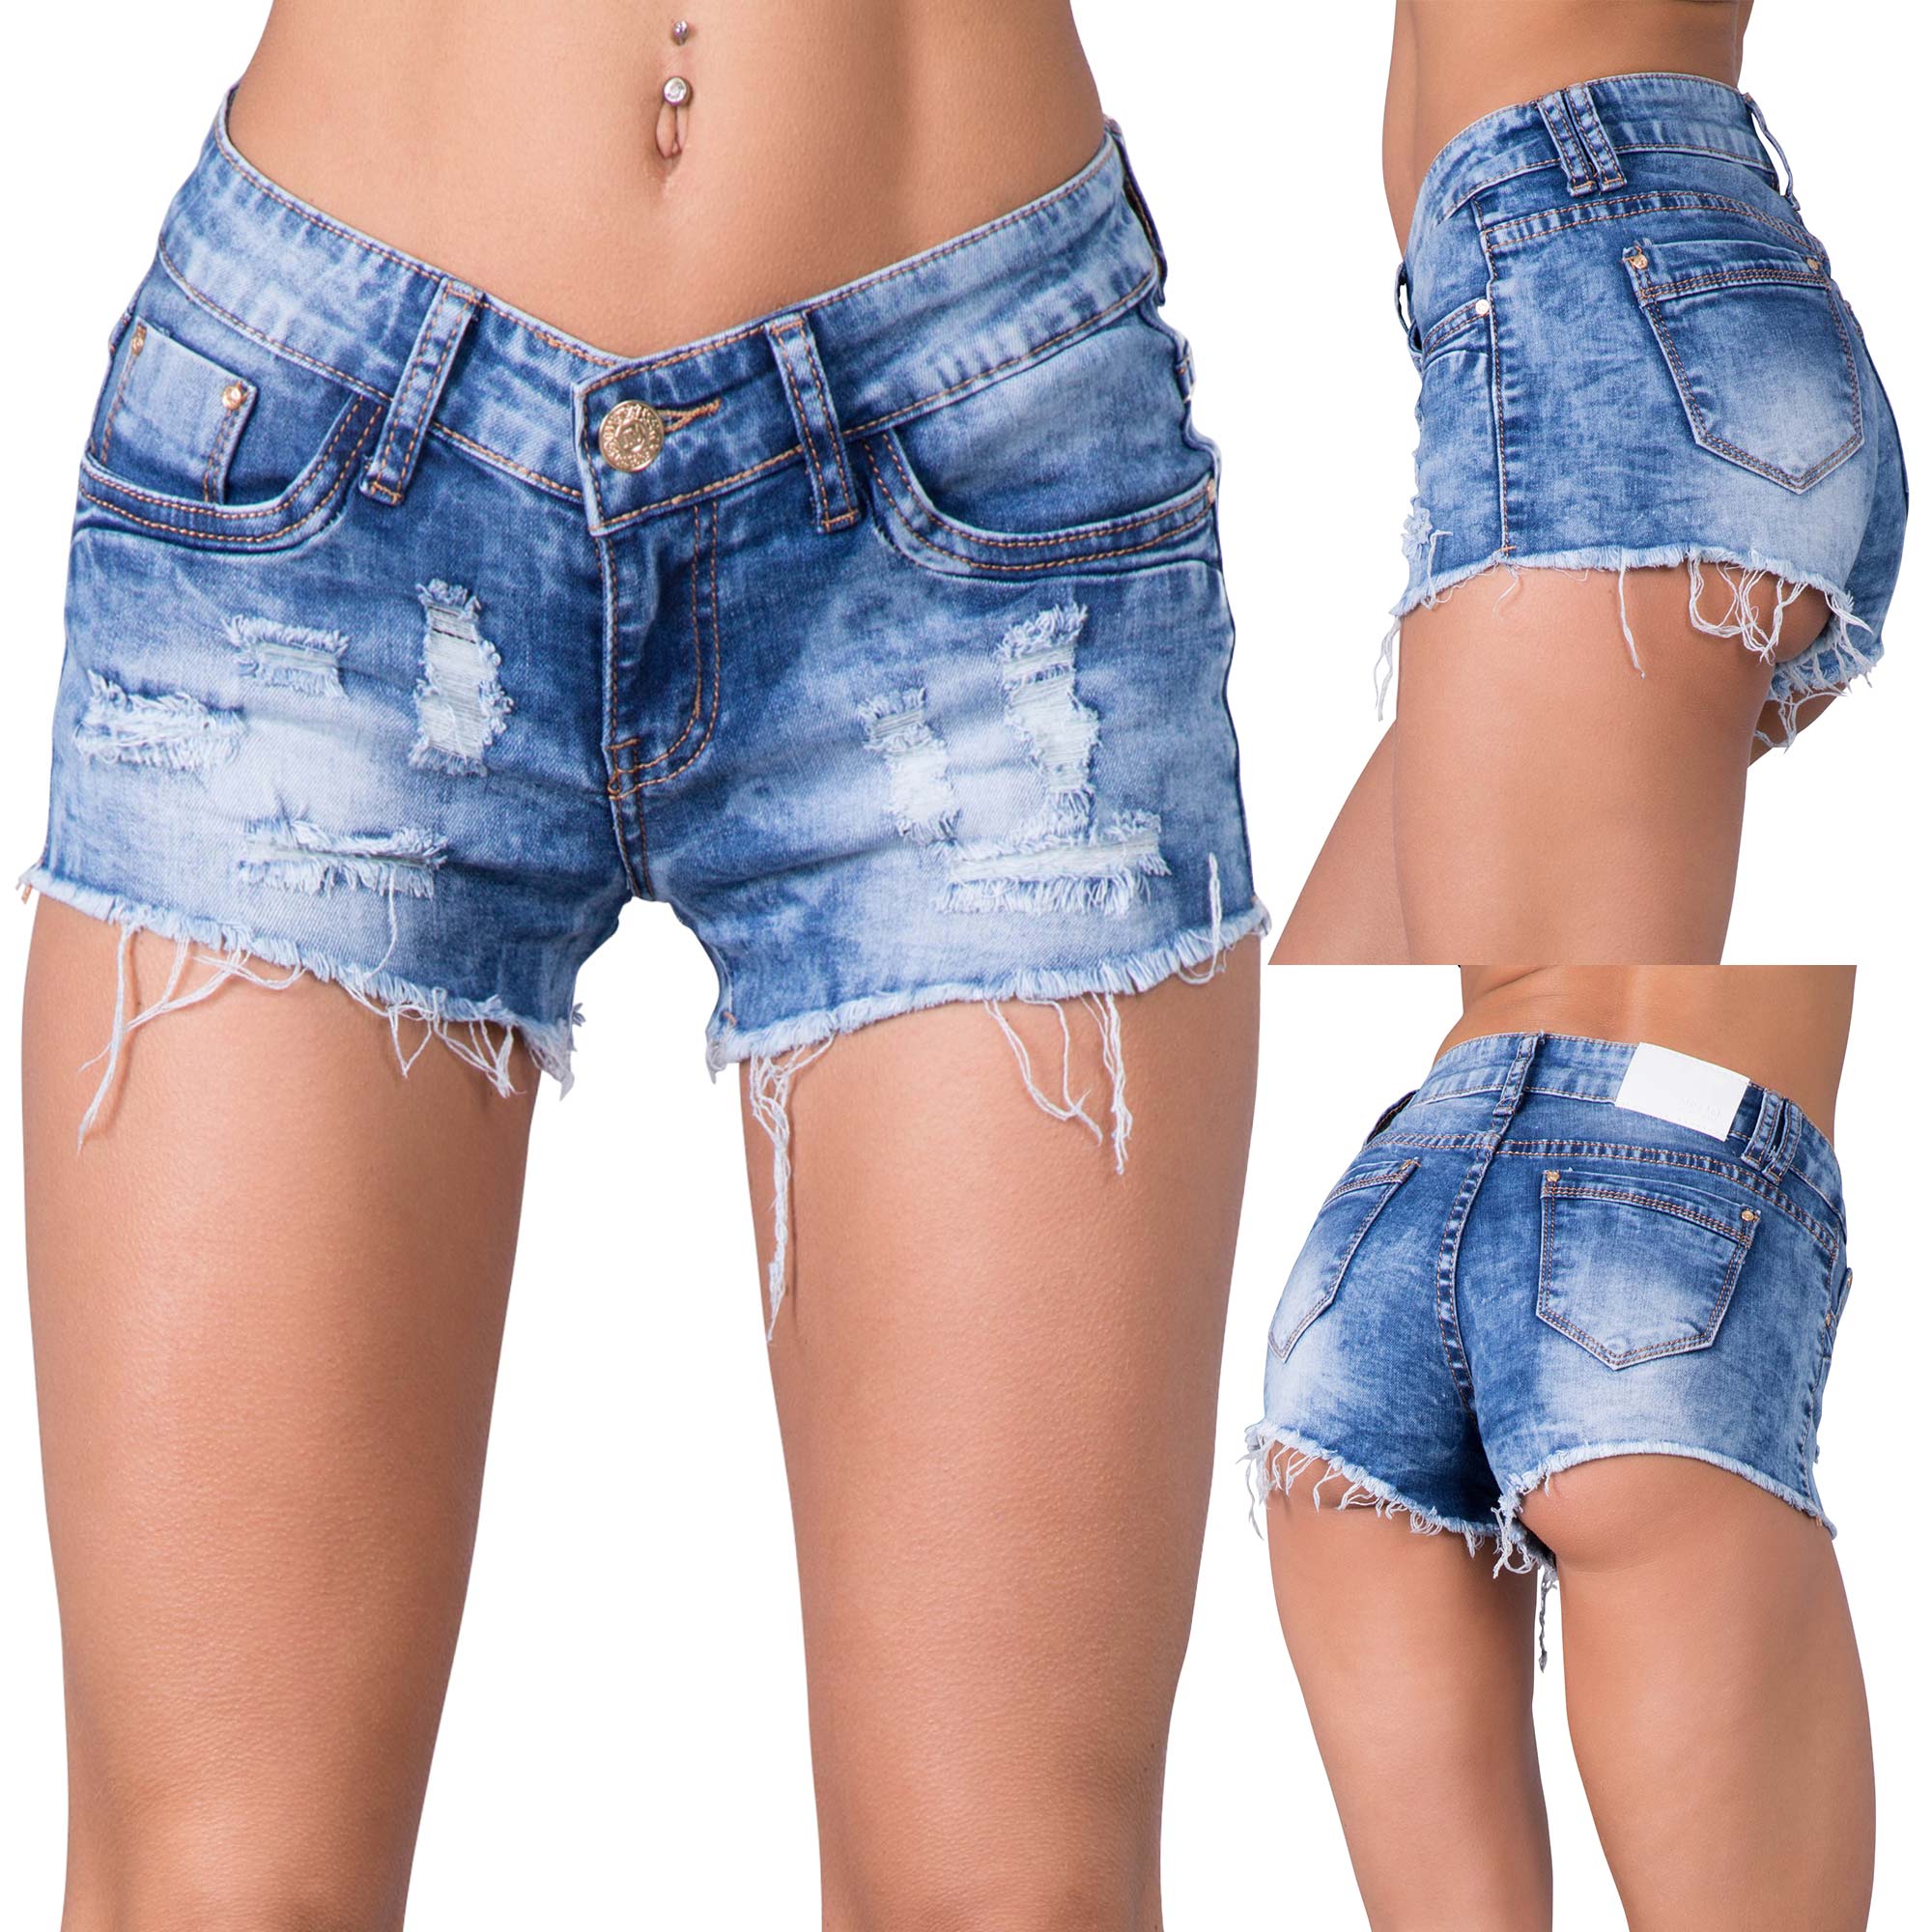 New Womens Ladies Sexy Denim Shorts Blue Jeans Hot Pants Size 8 10 ...